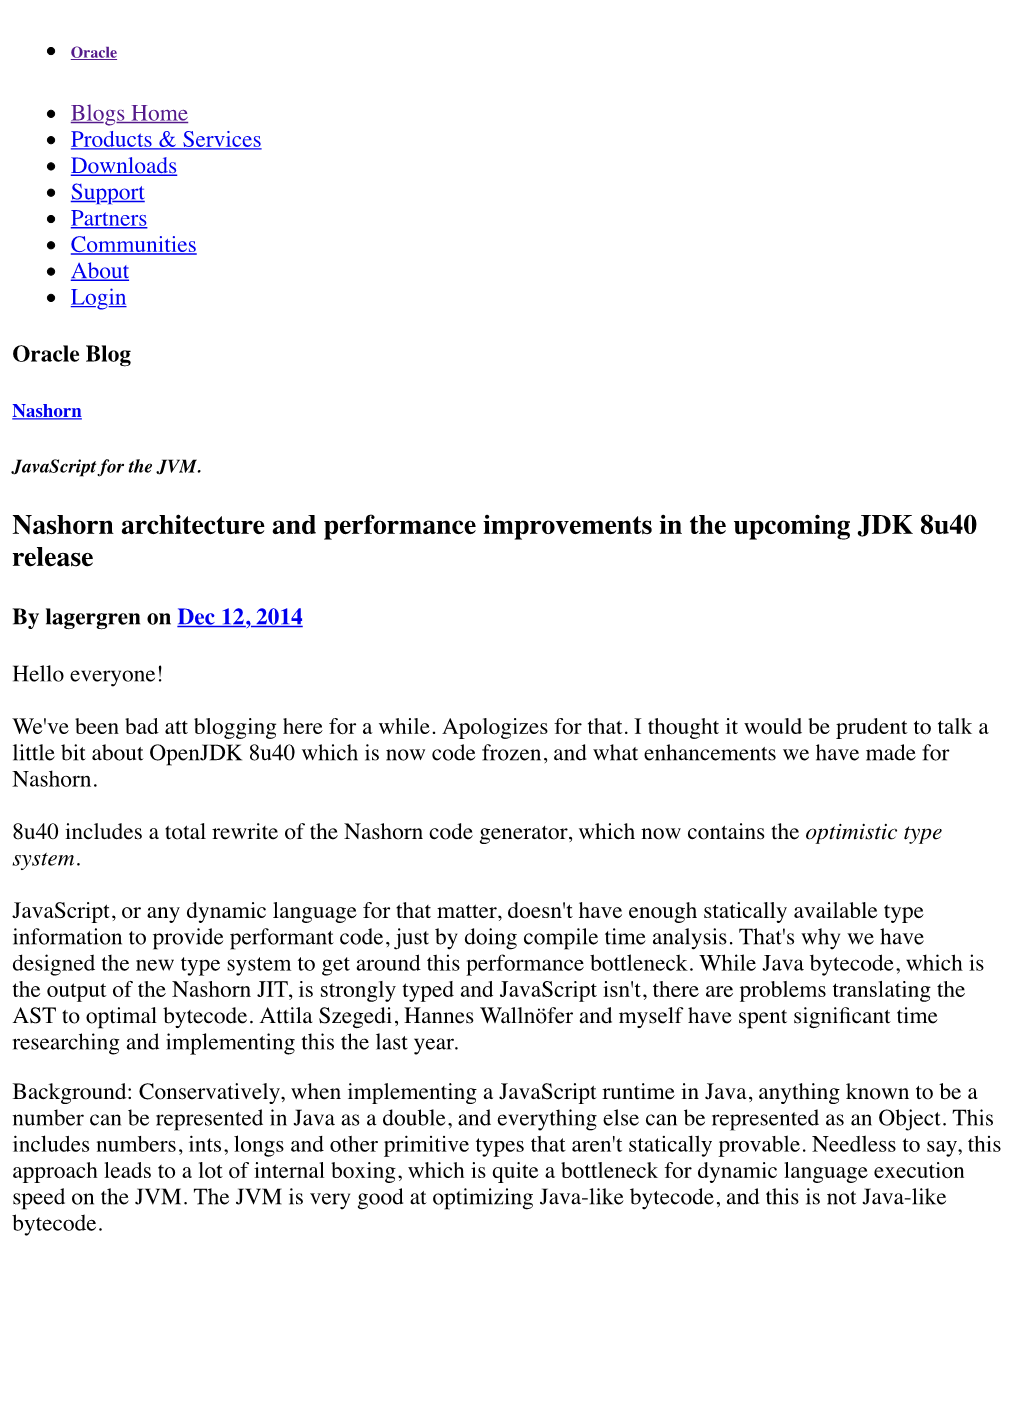 Nashorn Architecture and Performance Improvements in the Upcoming JDK 8U40 Release